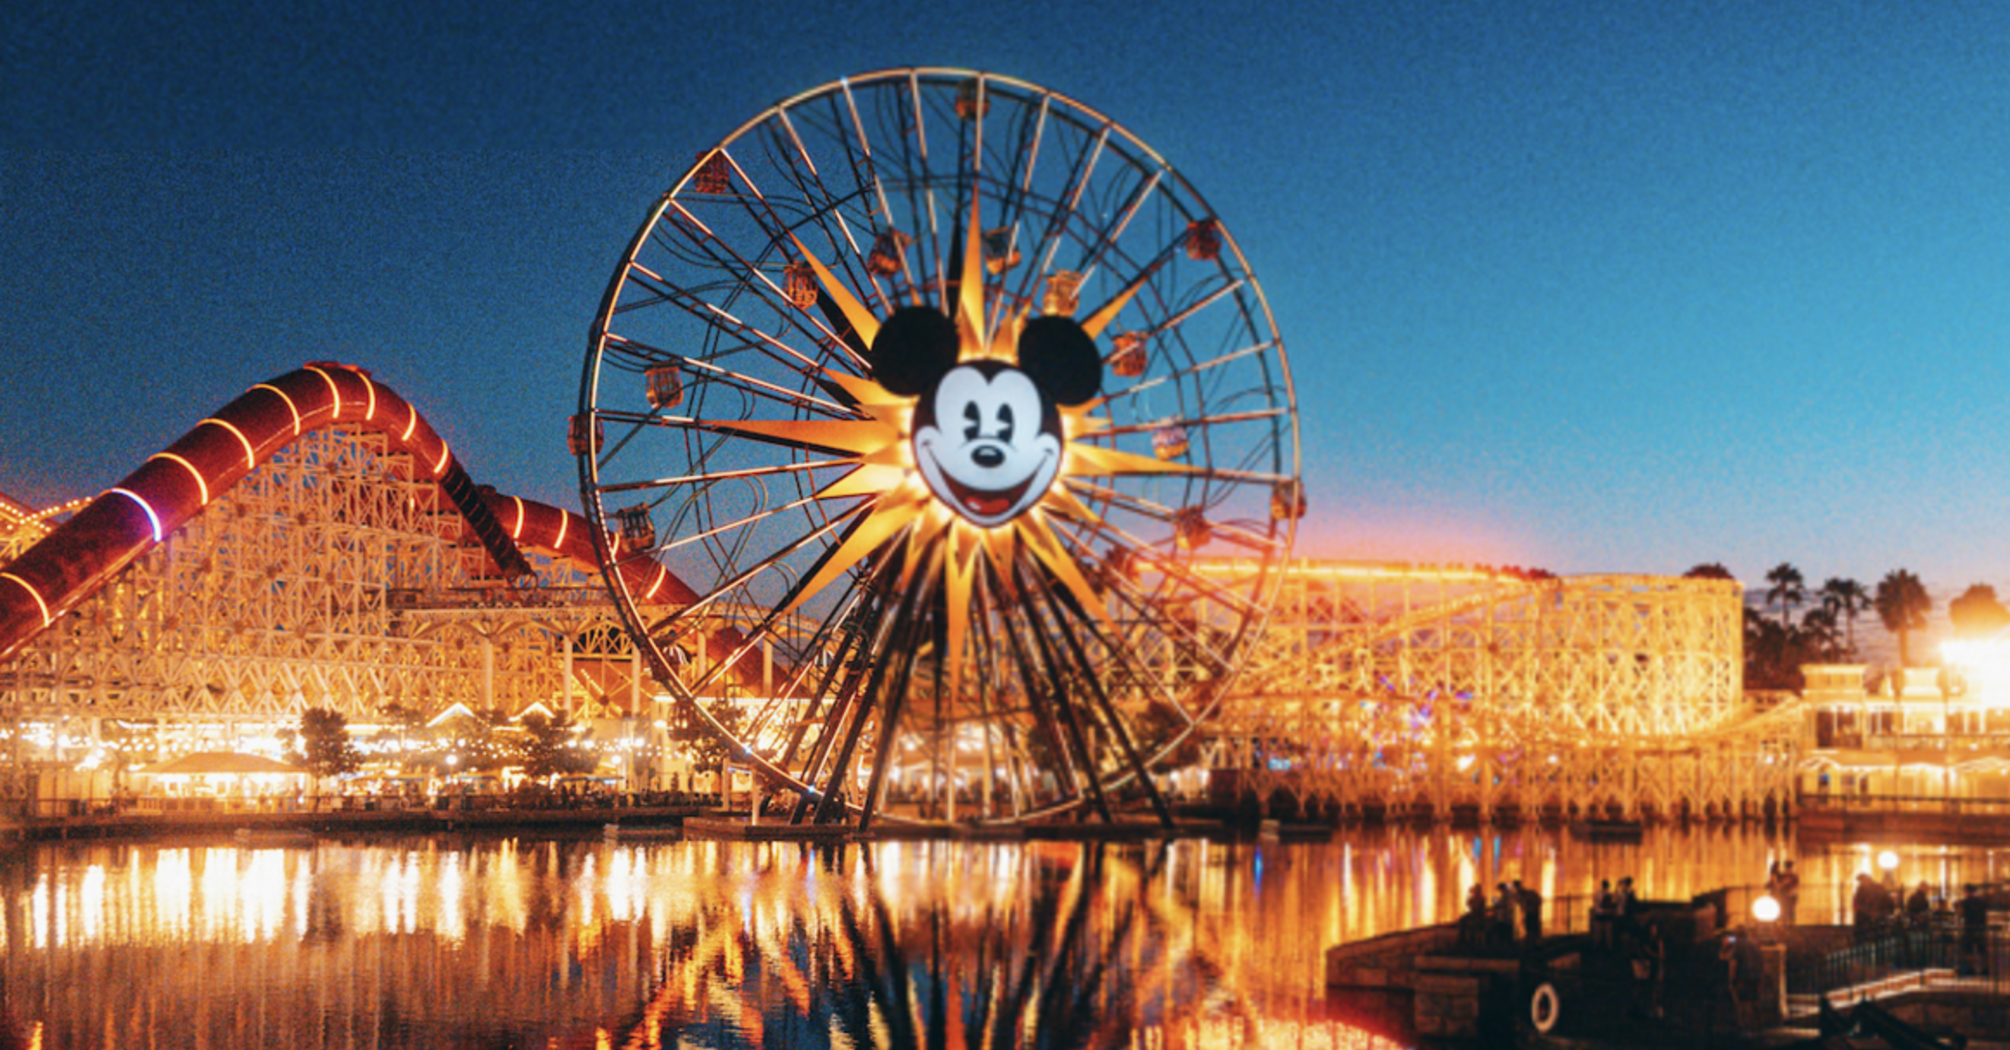 Traveling to Disneyland will become more expensive: ticket prices are expected to increase in 2025